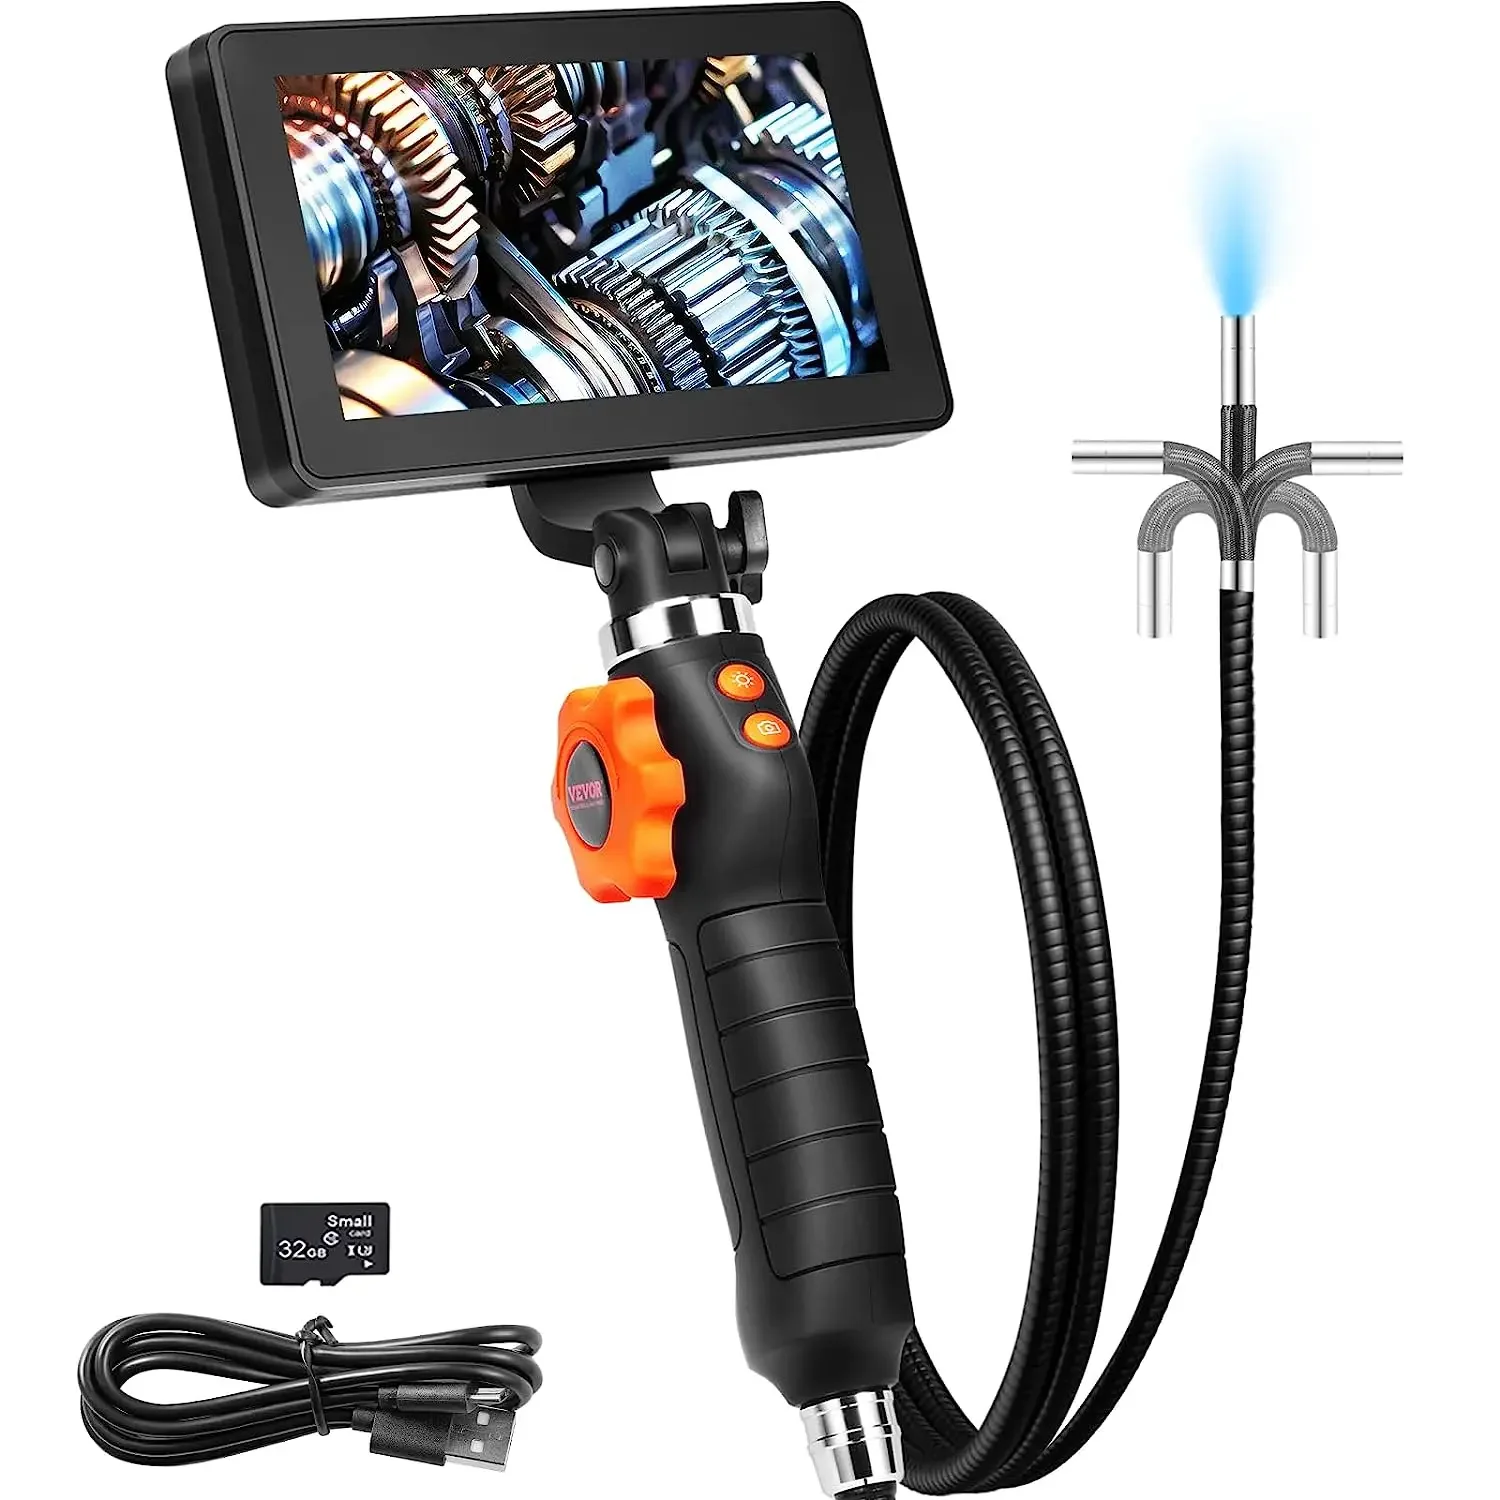 

VEVOR Articulating Borescope Camera with Light Two-way Articulated Endoscope Inspectionwith 6.4mm Tiny Lens 5" IPS 1080P Screen